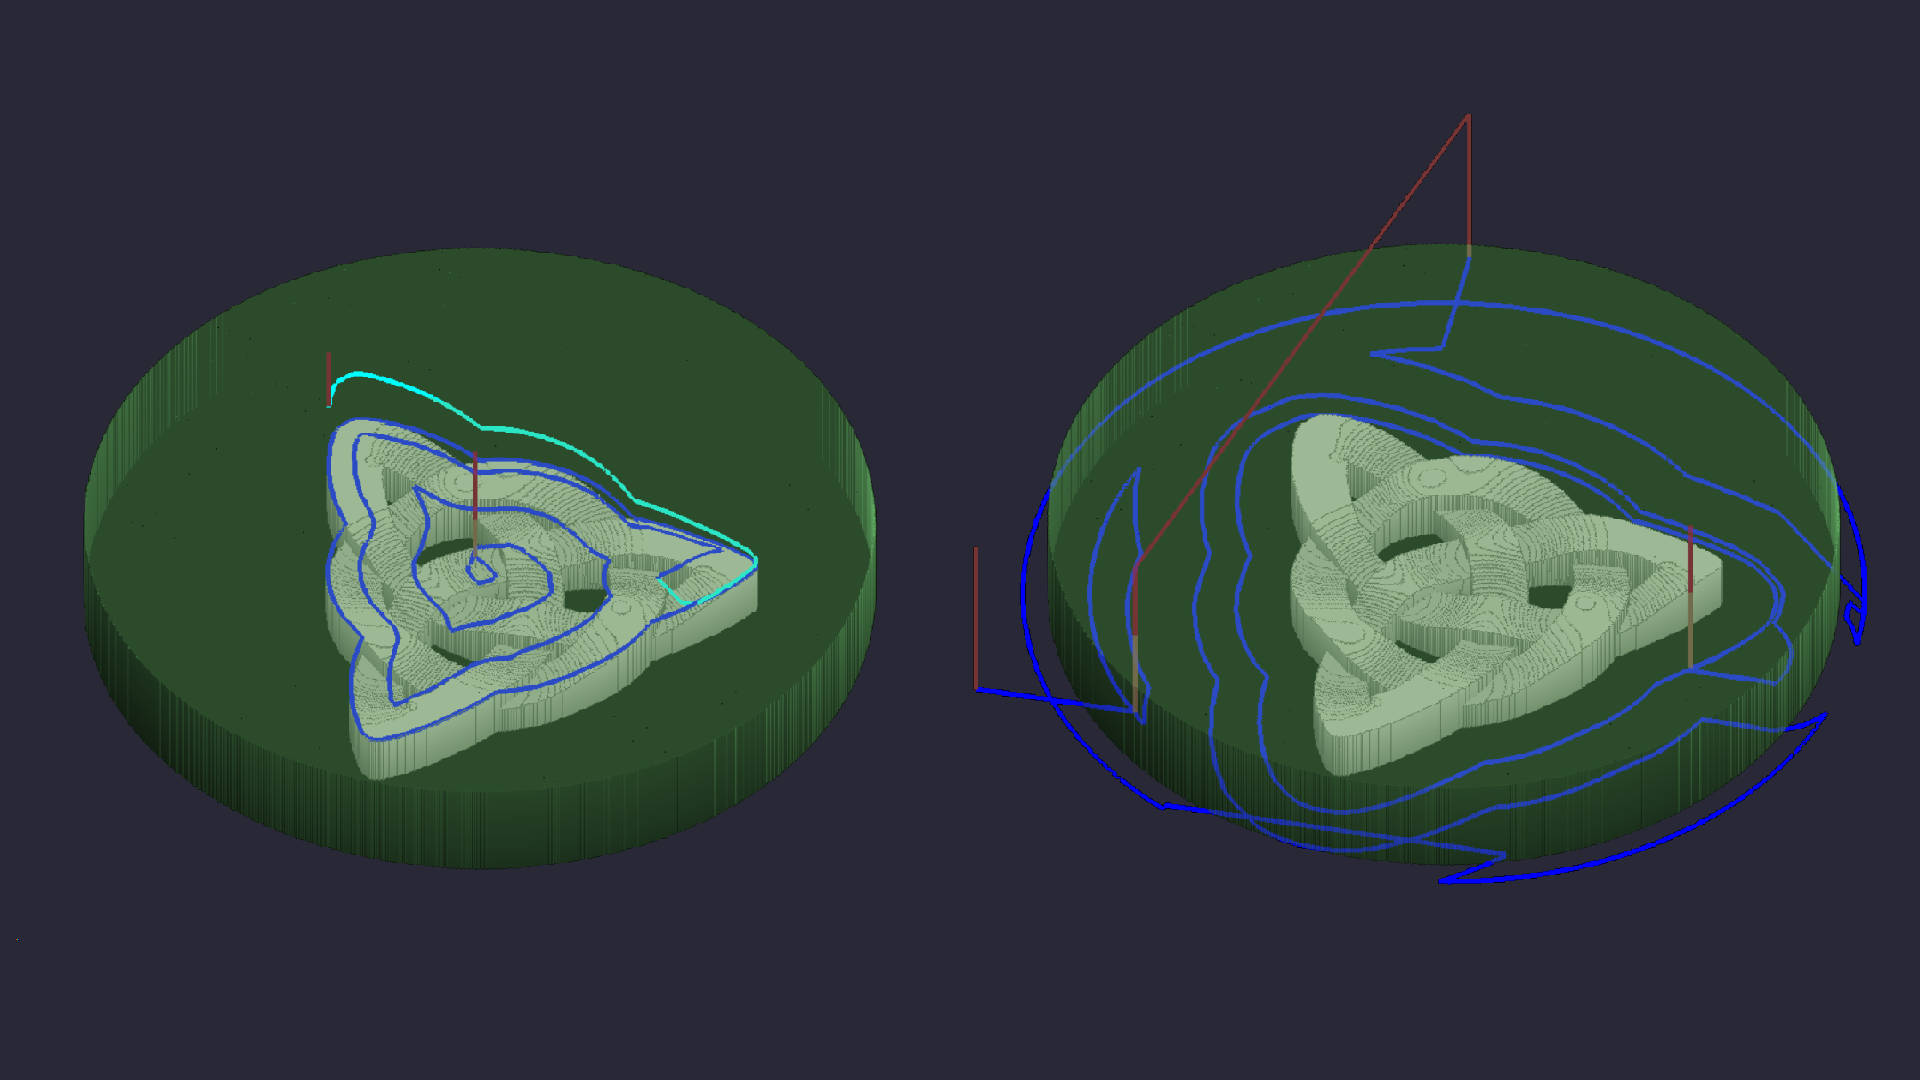 The figure shows two identical models. In the left model, the toolpaths are only visible inside the model surface. In the right model, the toolpaths are only outside the model geometry.